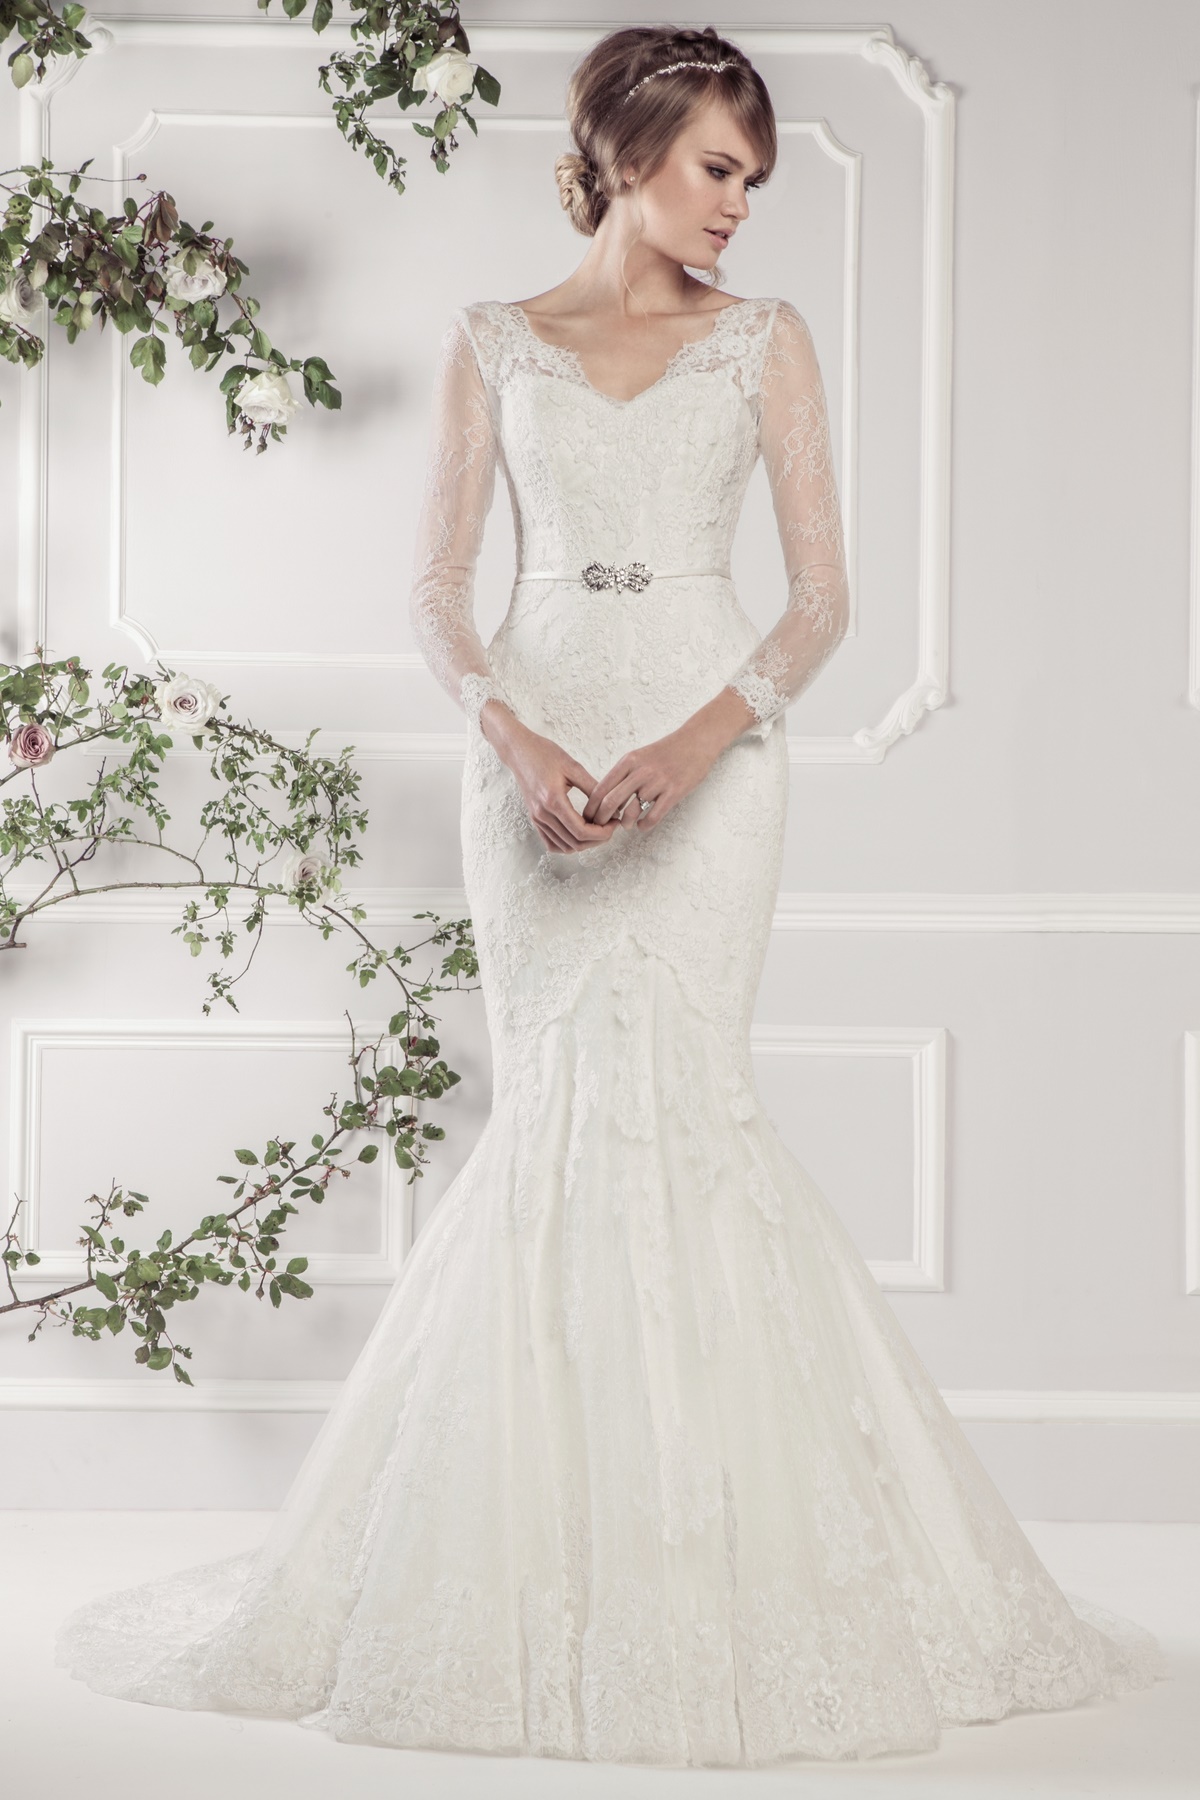 Wedding Dresses Wedding Gowns Bridal Gowns Charity